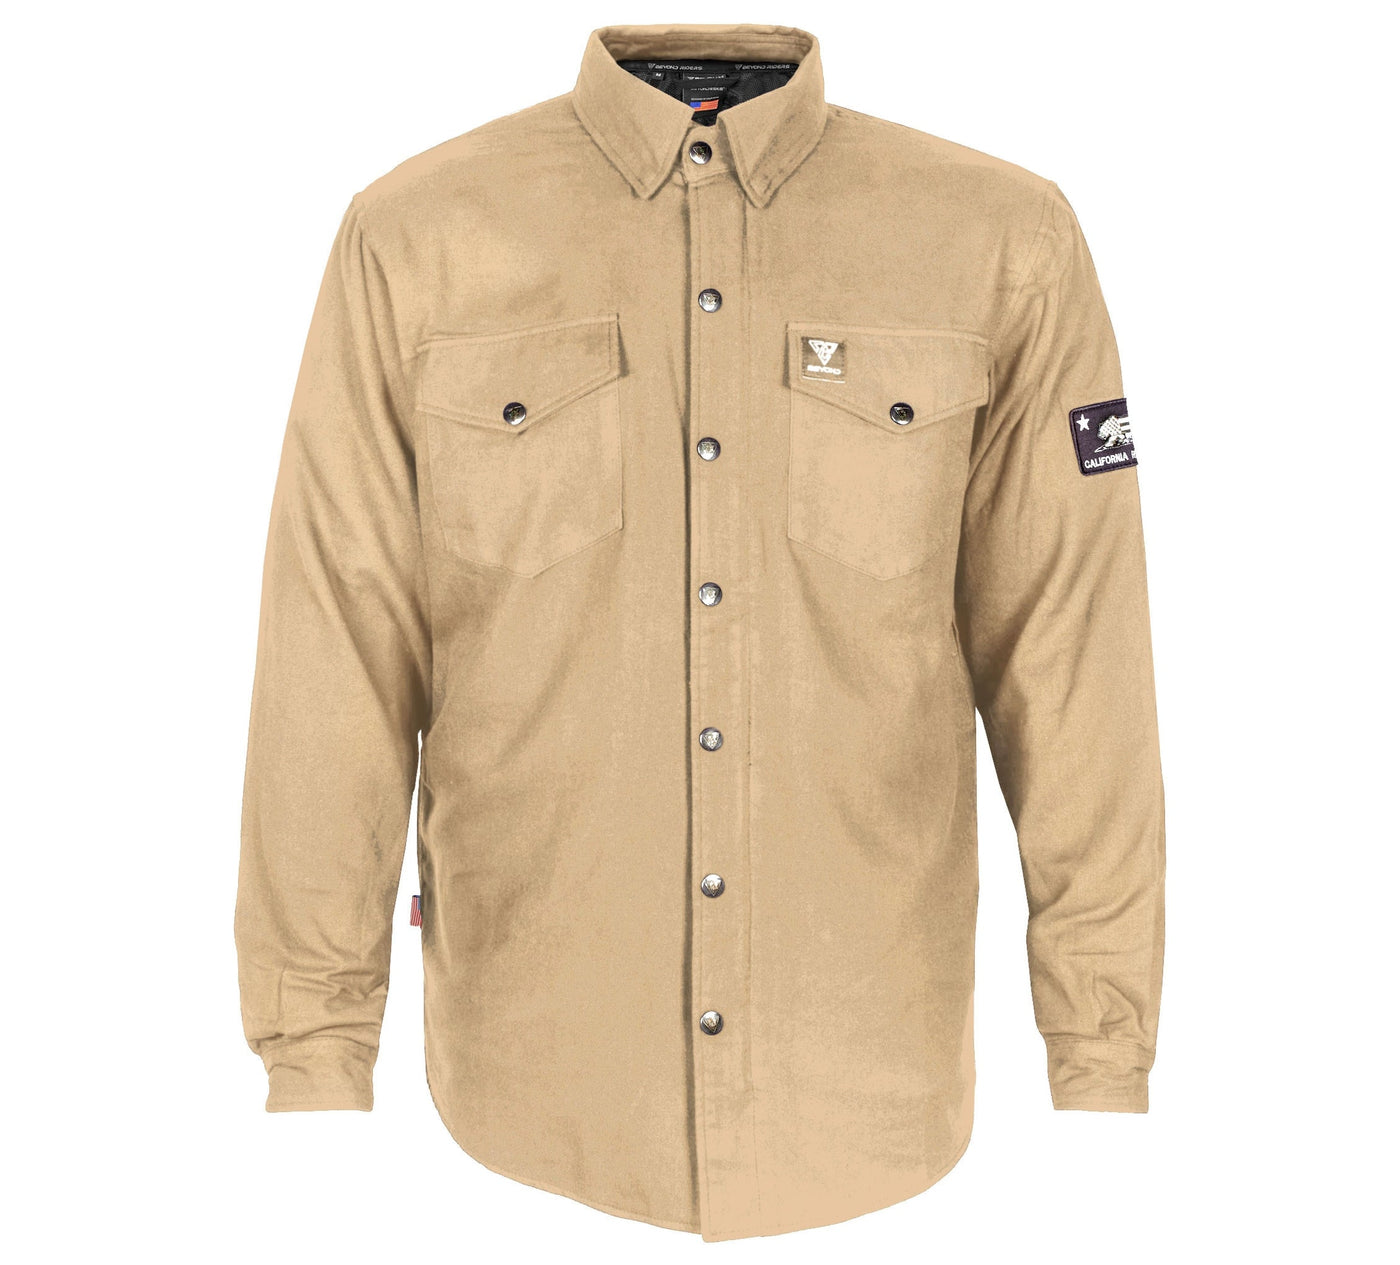 Protective Flannel Shirt with Pads - Khaki Solid